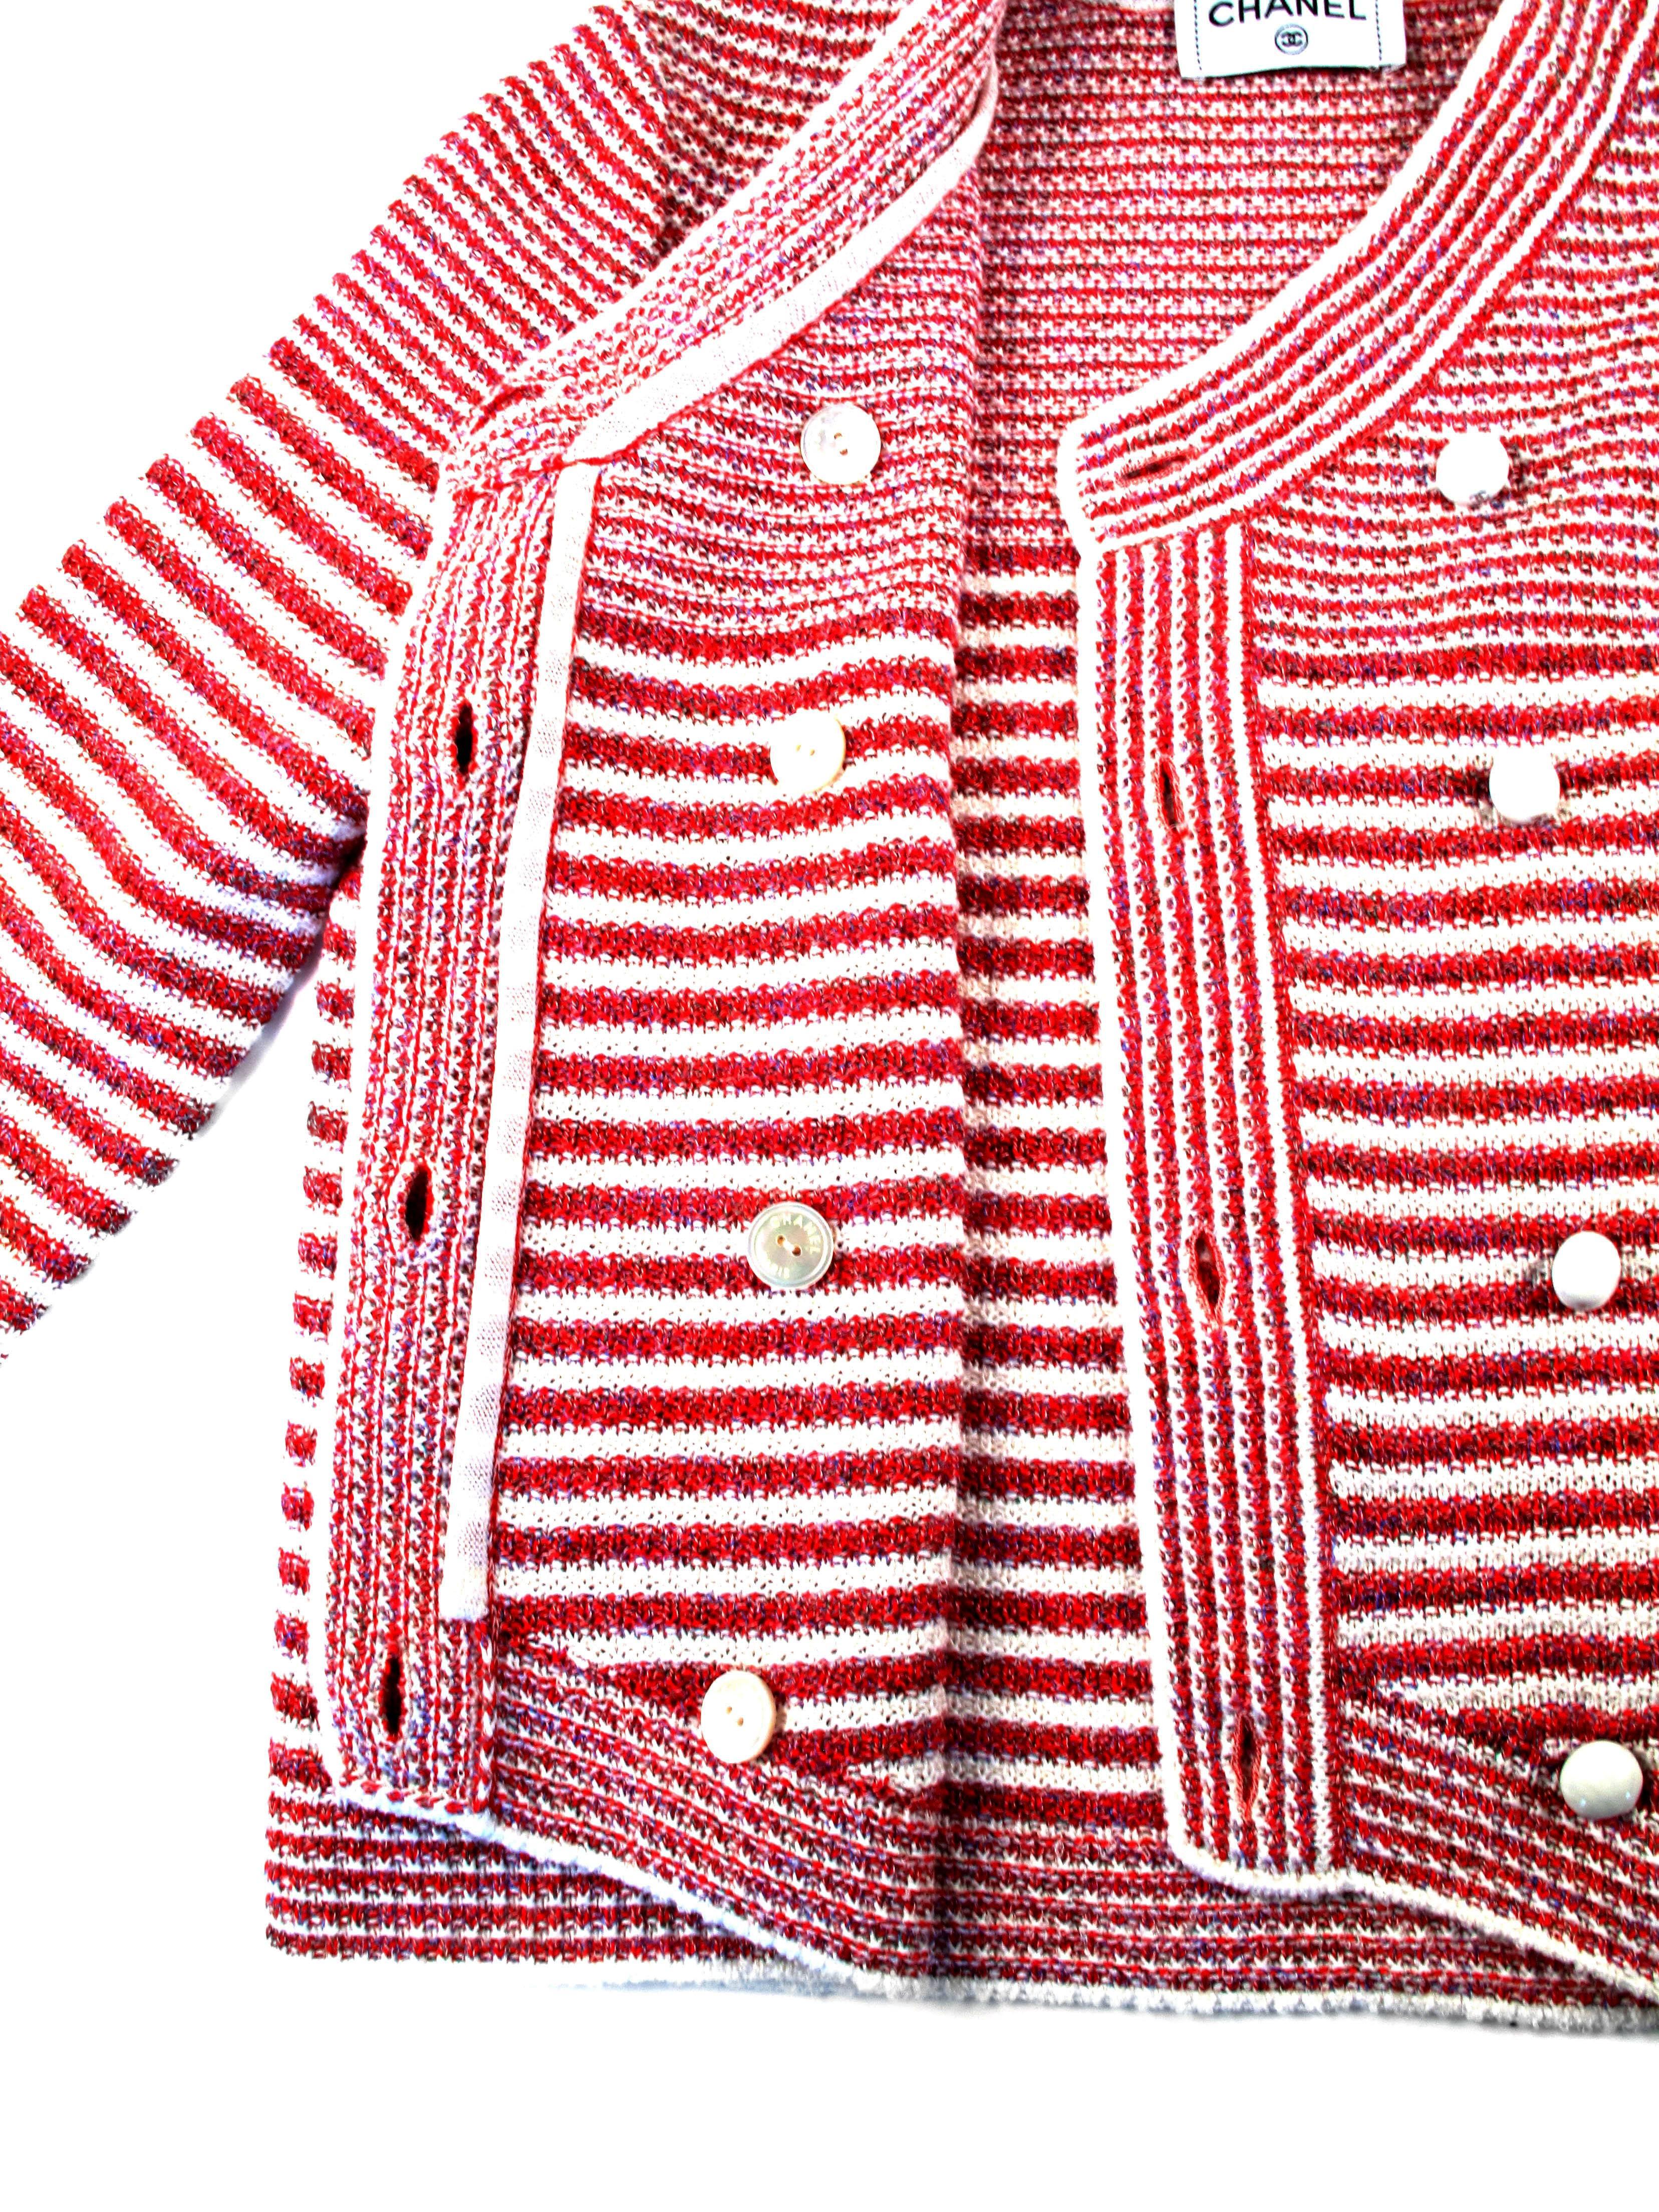 Chanel 2014 Pearl Jacket Cardigan - US 10 / 12 - 44 - Striped Red White Coat CC 1